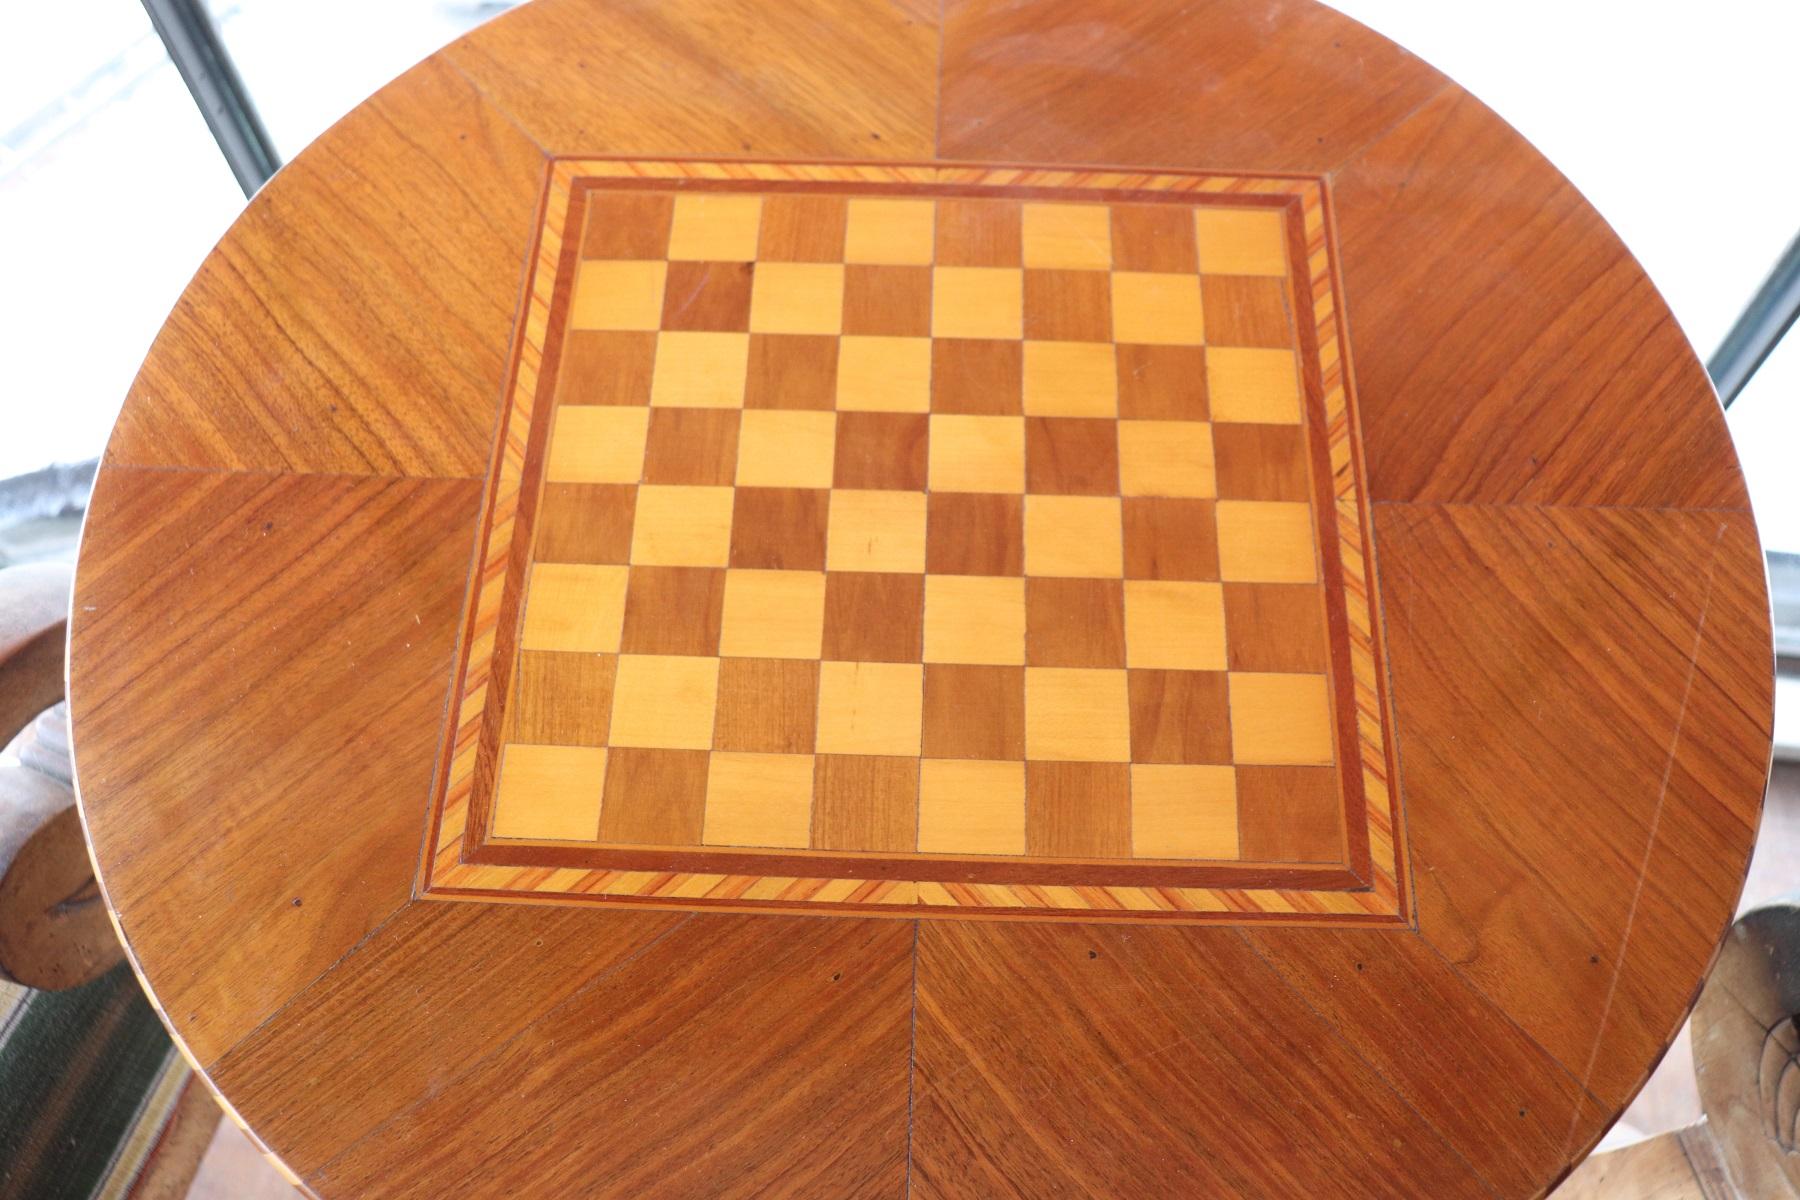 round chess table with stools